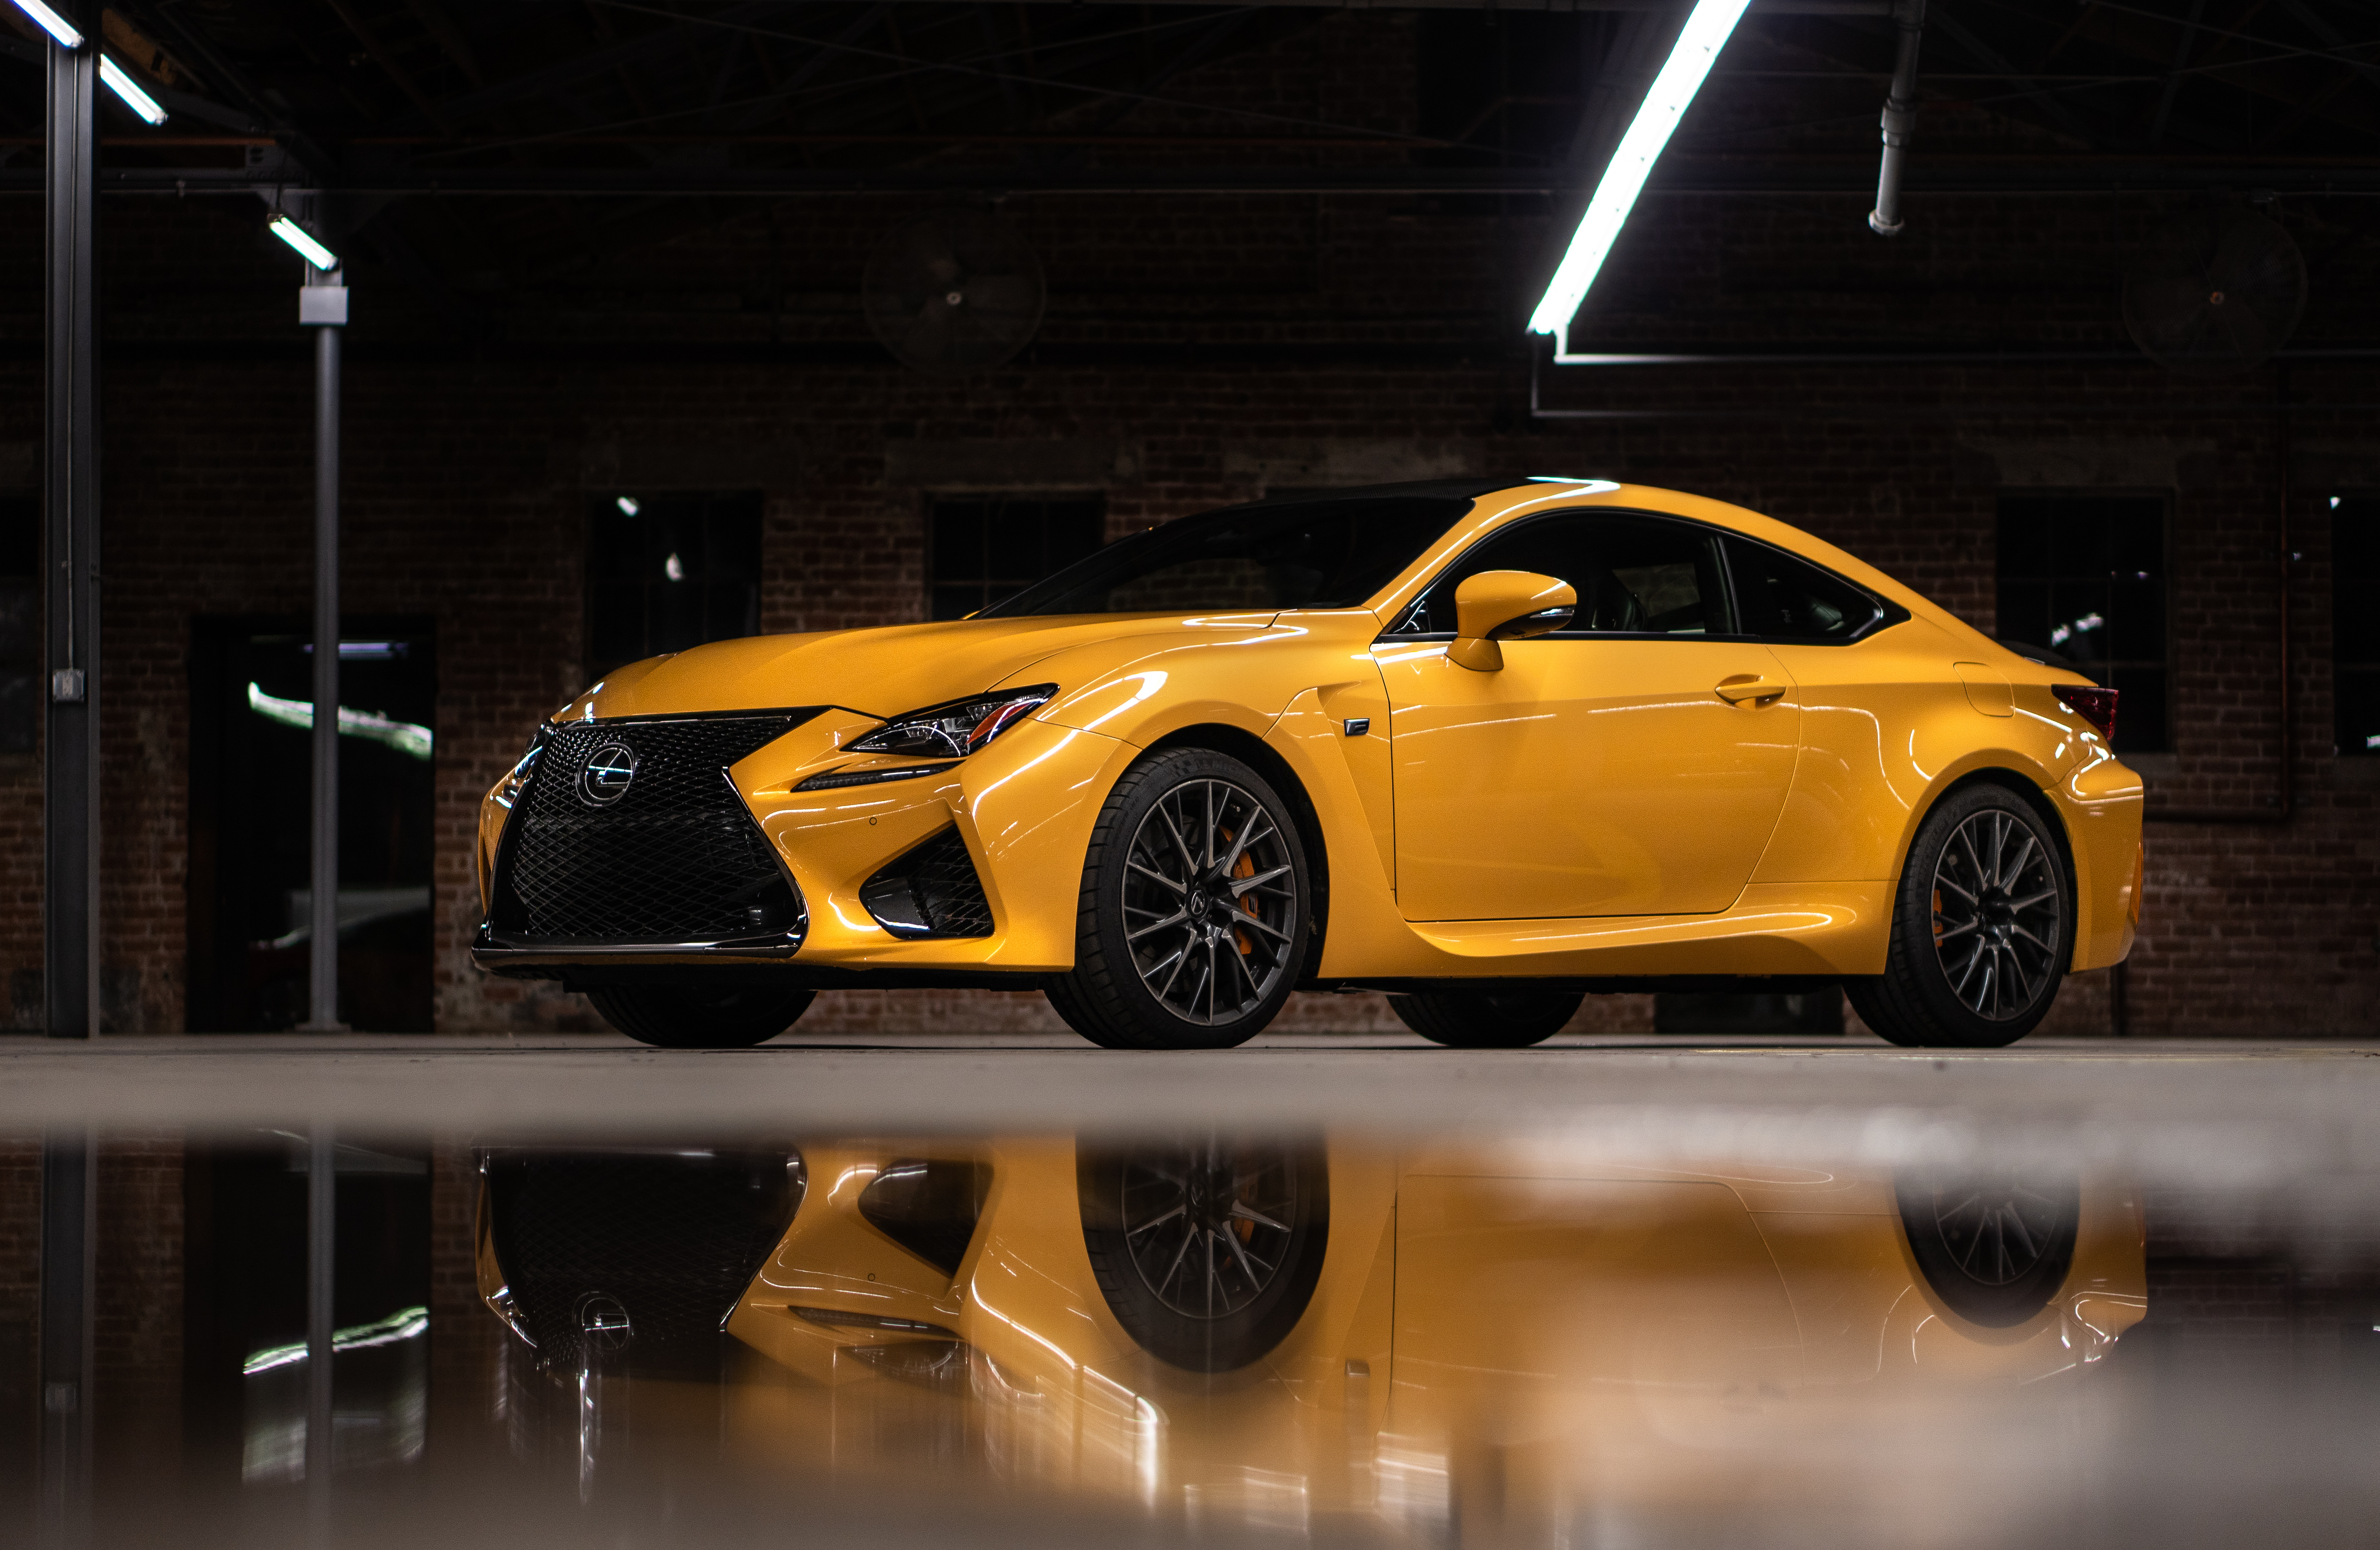 The 2019 Lexus RC-F has great exterior looks, but its performance and interior are falling behind what competitors offer. | Rebecca Nguyen photos